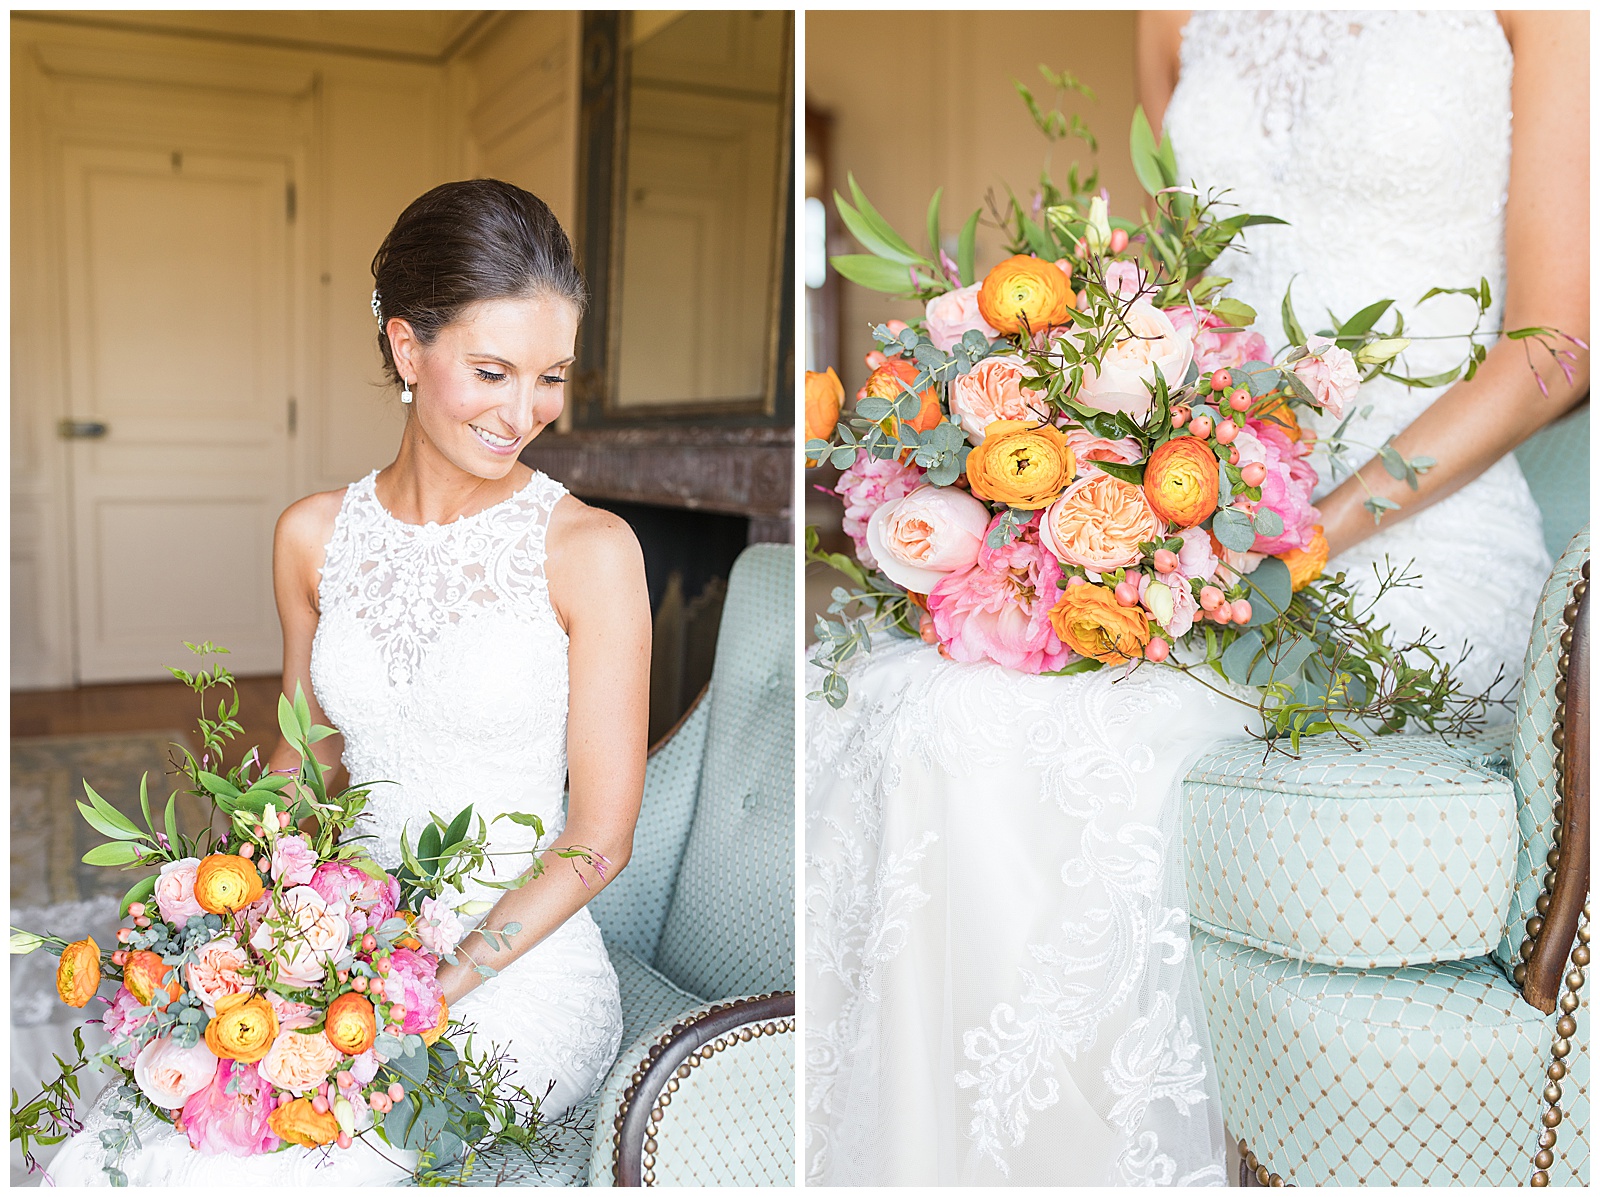 vibrant summer bouquet of flowers for the bride at Glen Manor